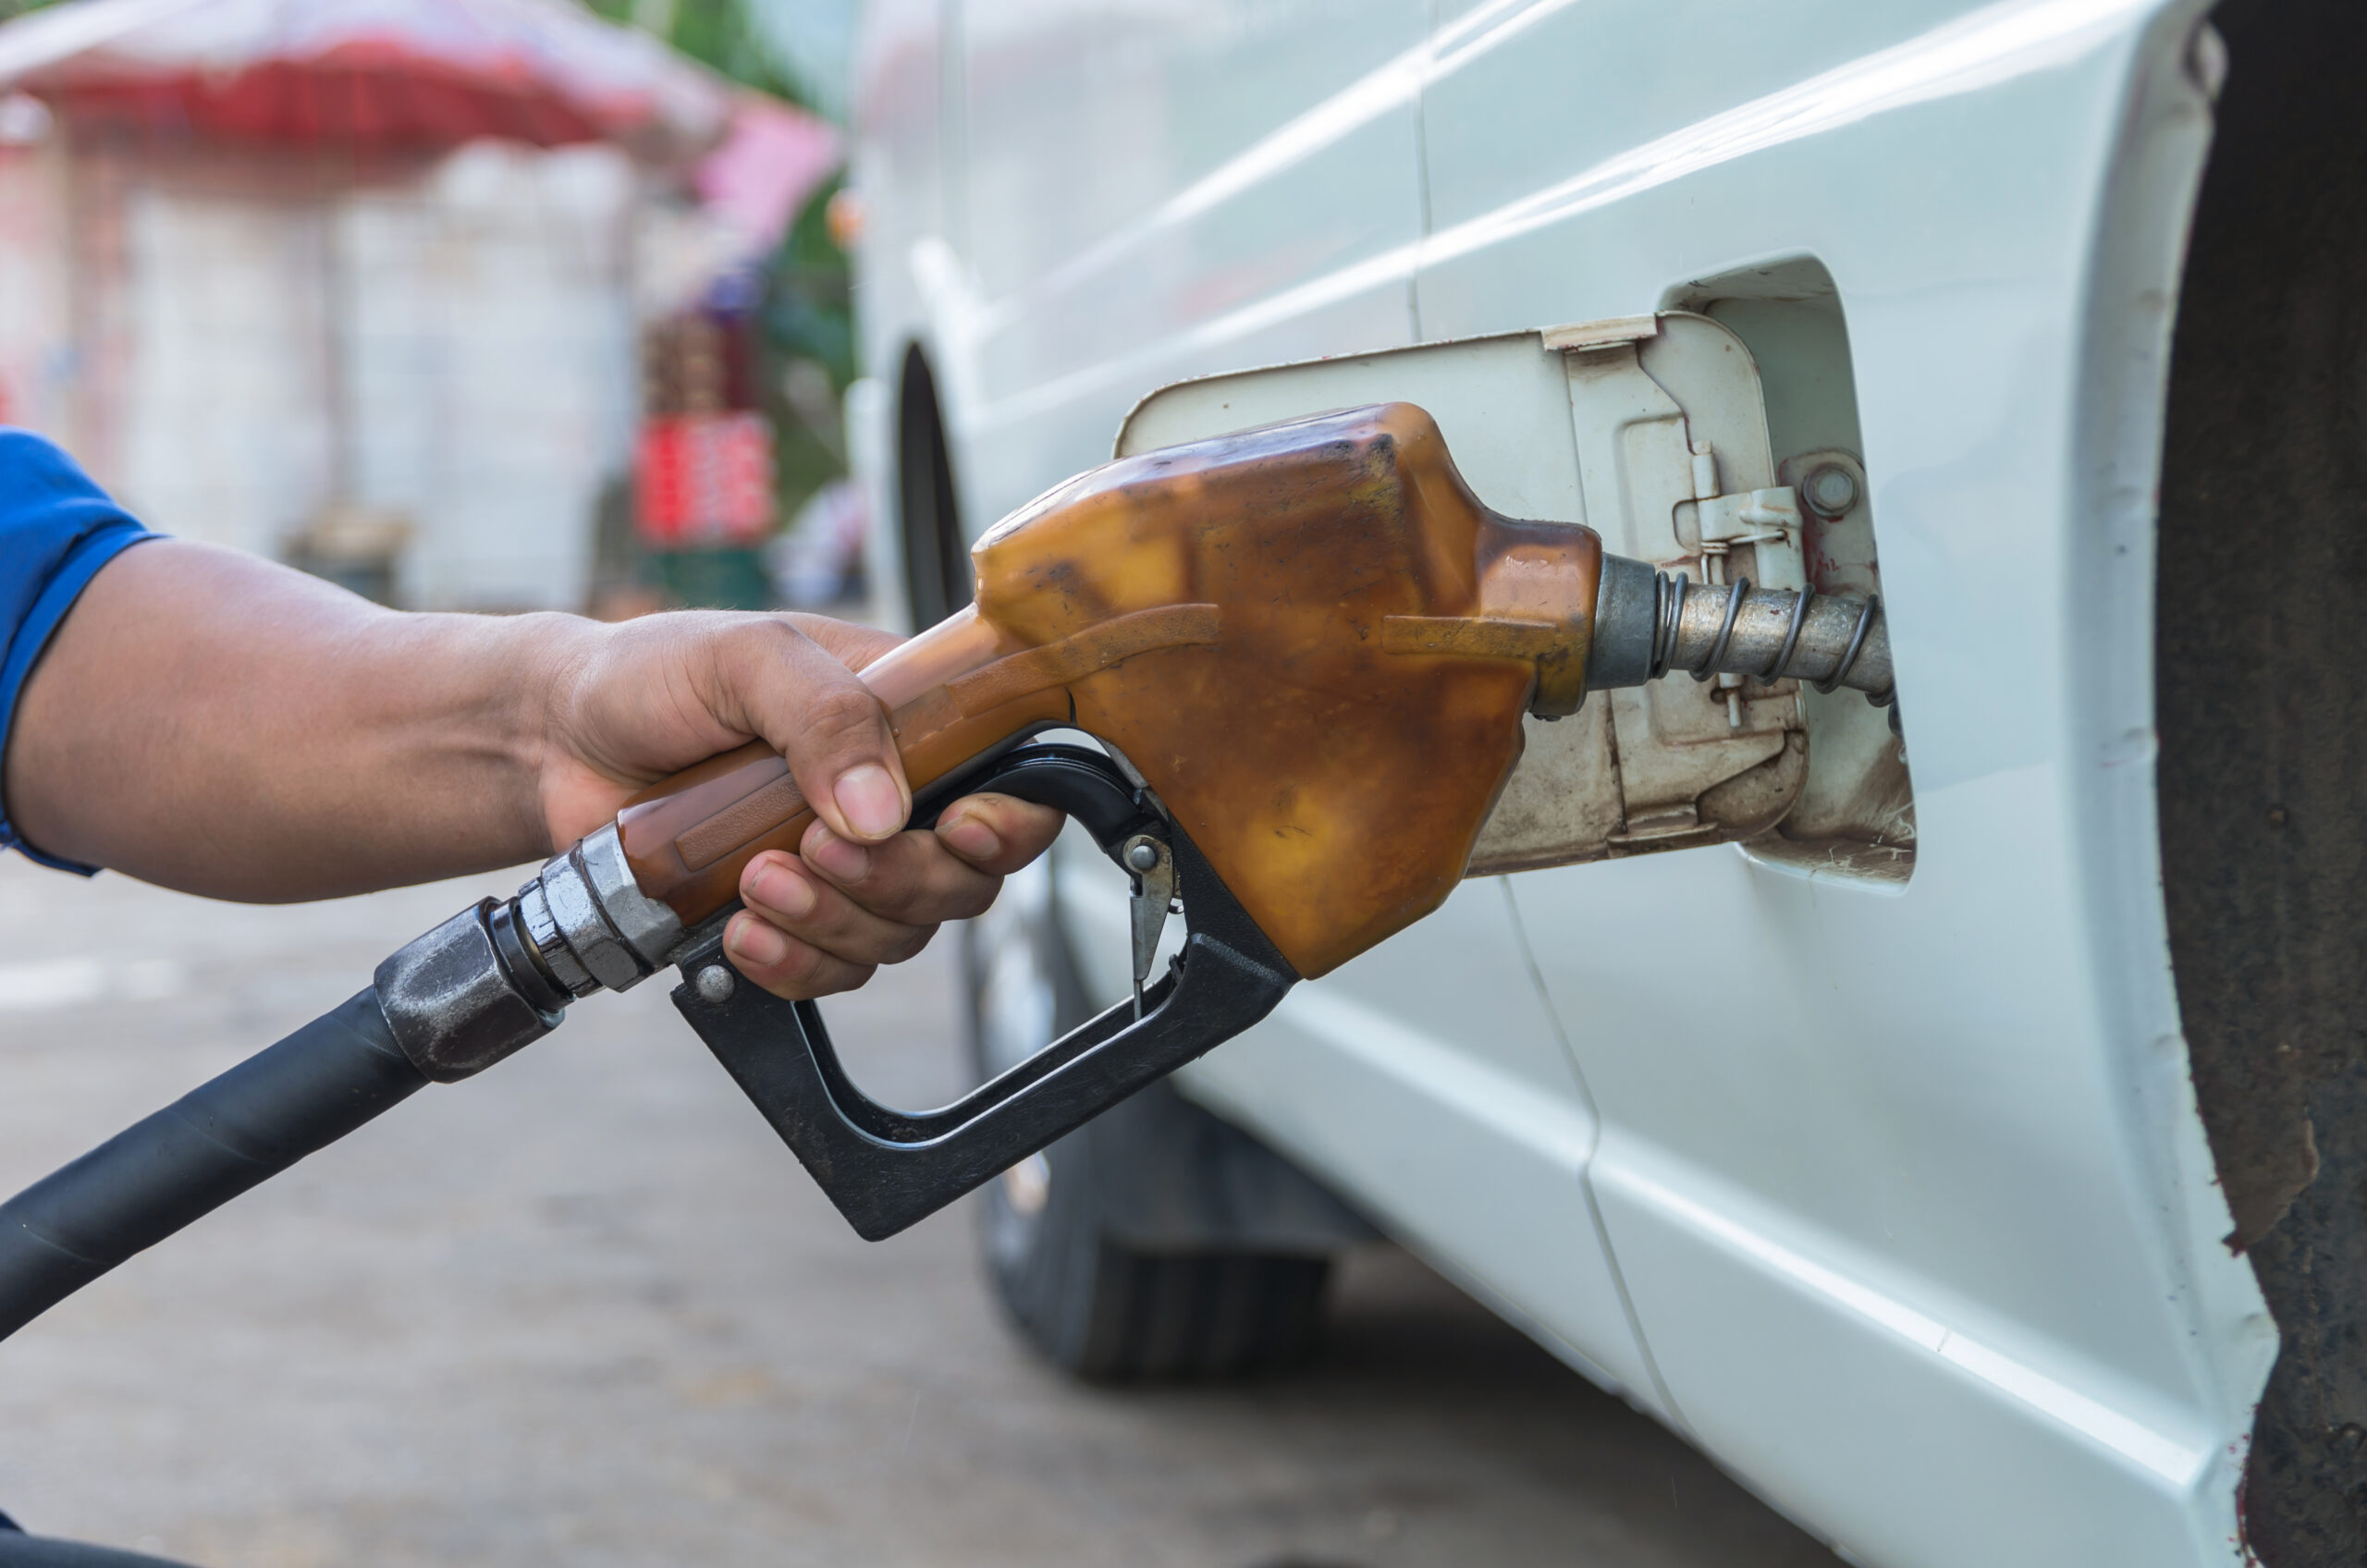 Hand hold Fuel nozzle to add fuel in car at filling station